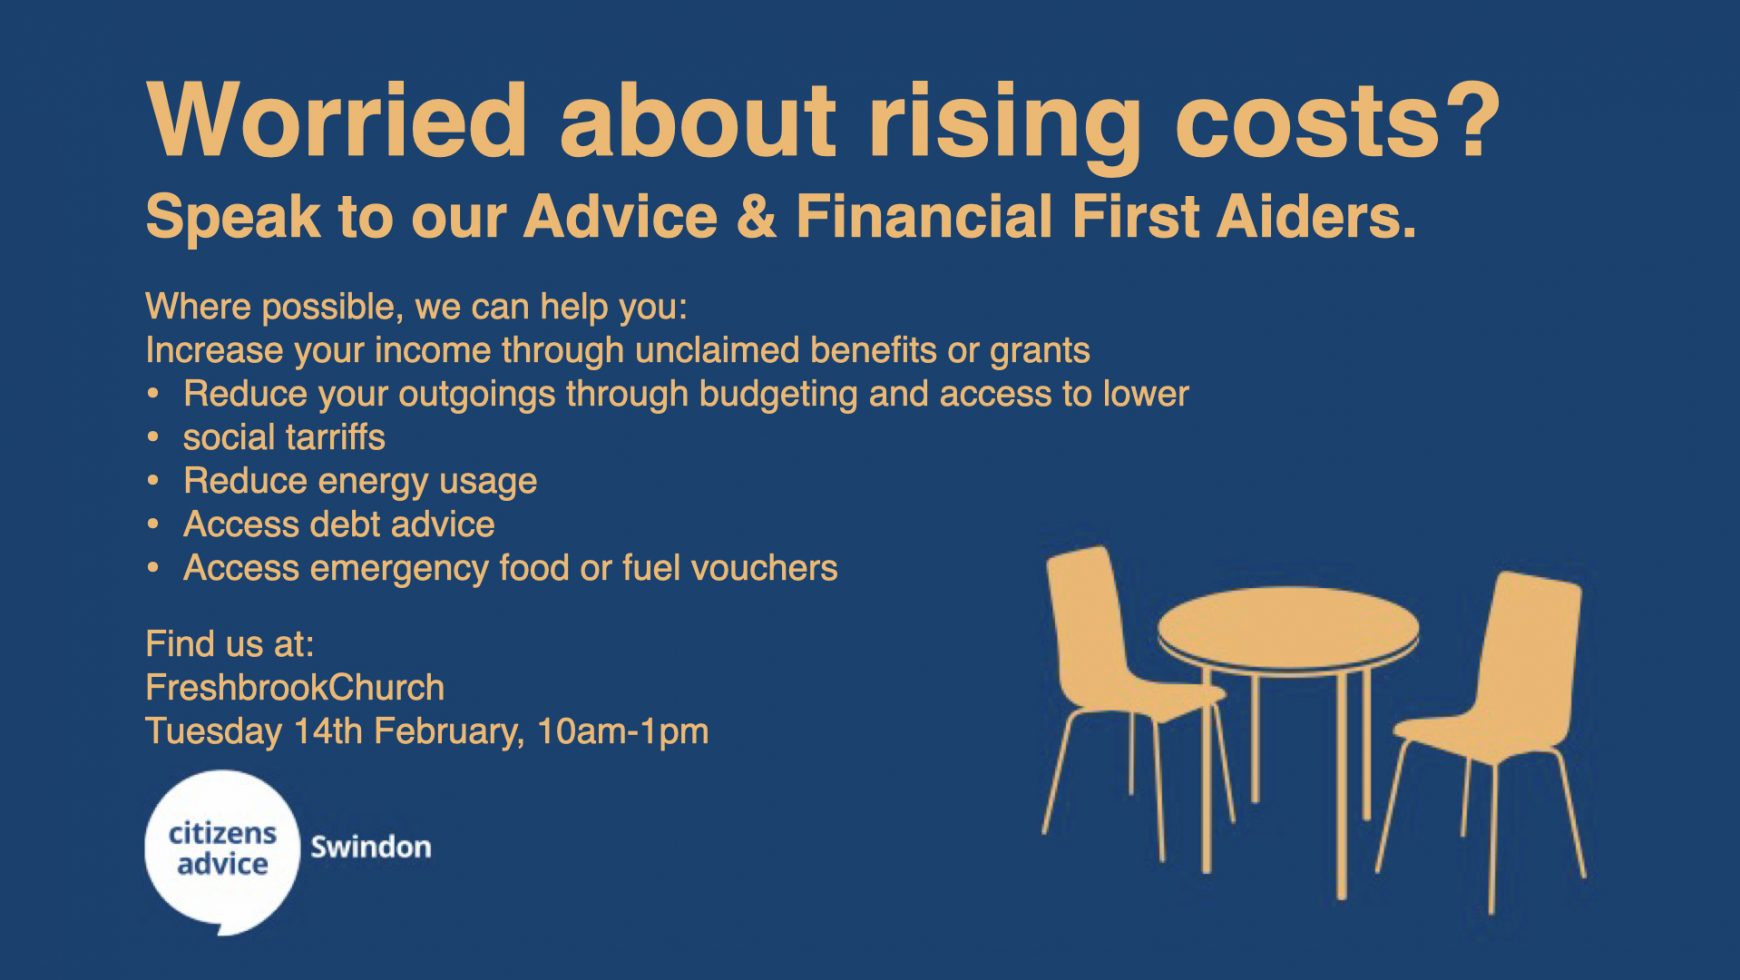 Notice of upcoming Citizens Advice session